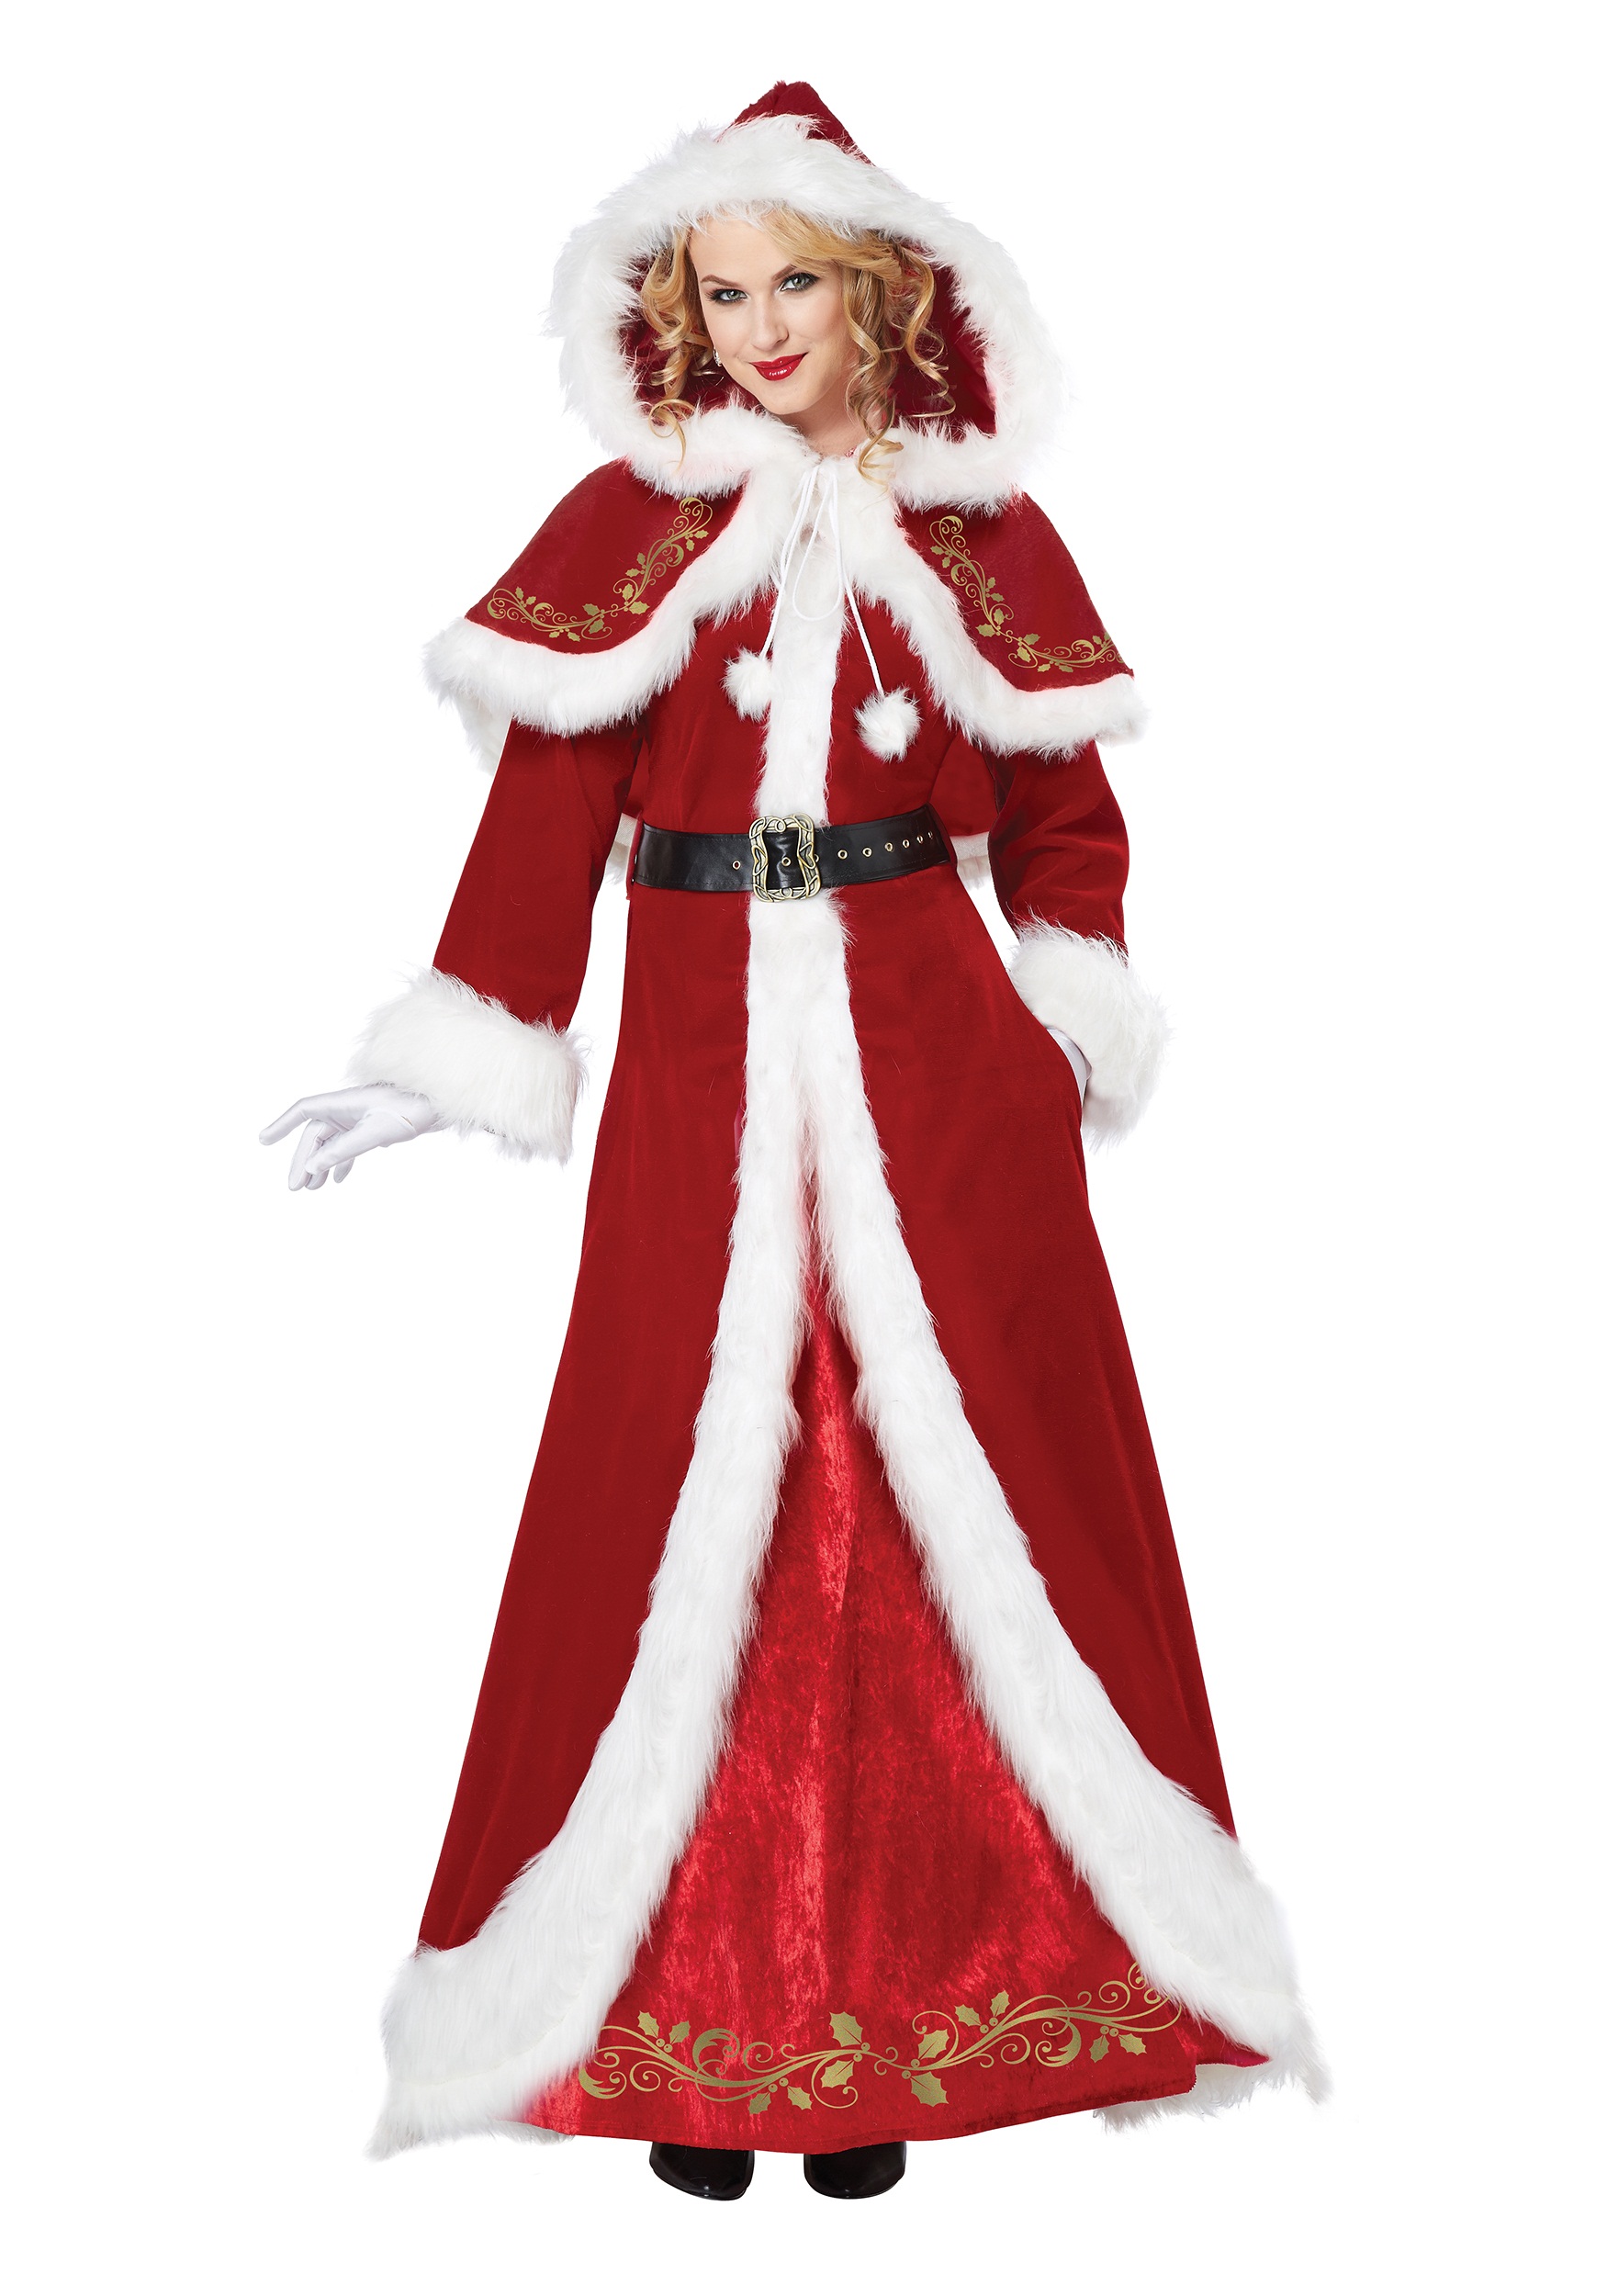 Photos - Fancy Dress California Costume Collection Deluxe Classic Mrs. Claus Costume Red/Wh 